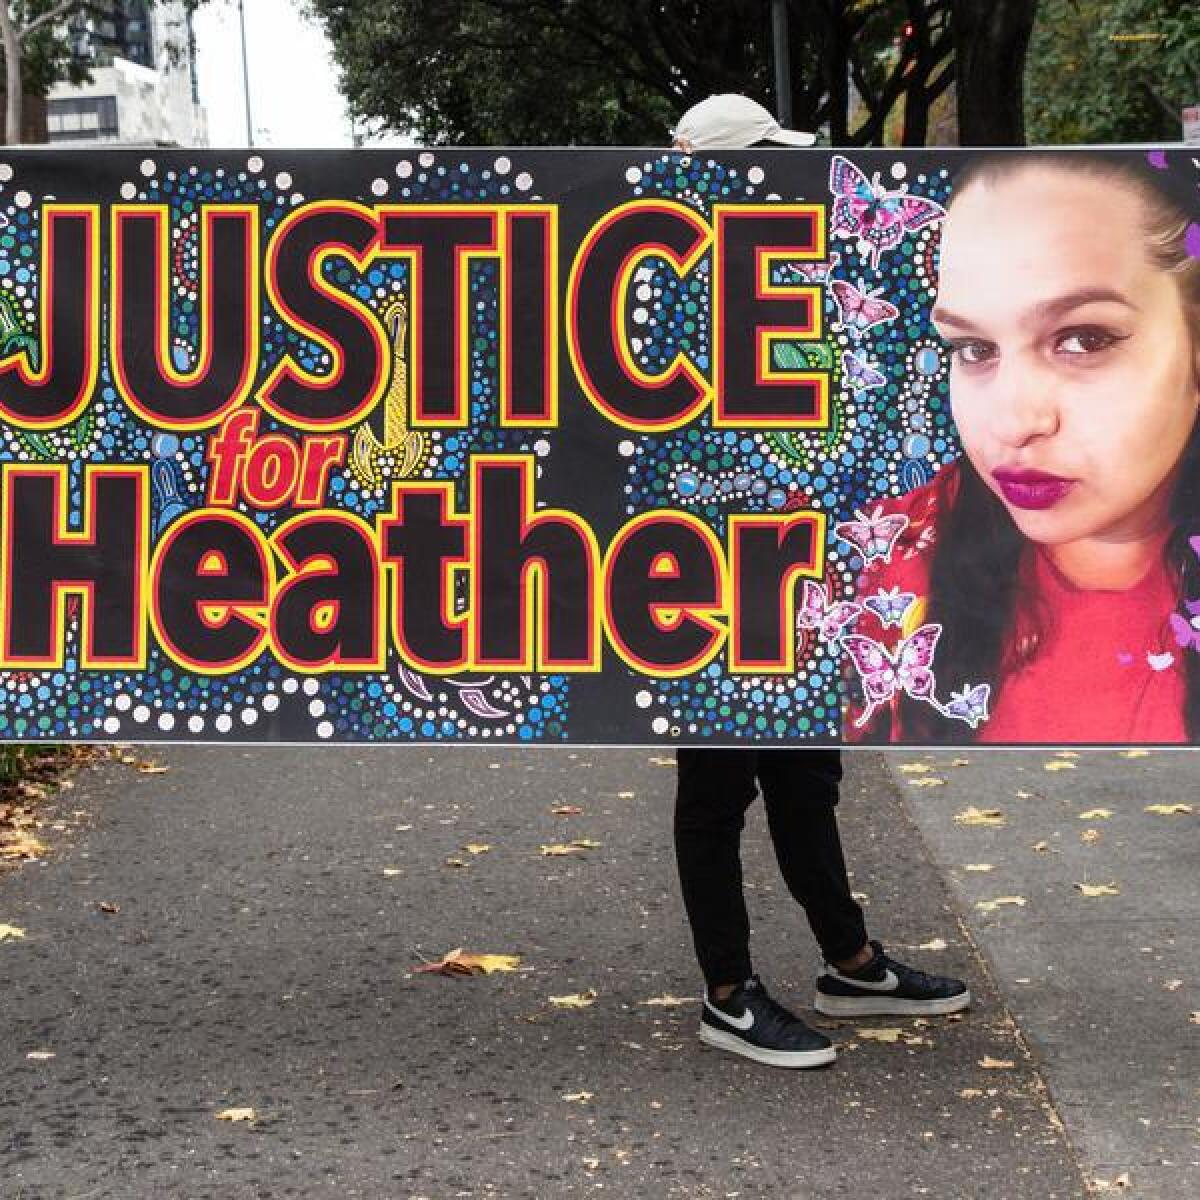 Heather Calgaret's supporters outside court with a banner